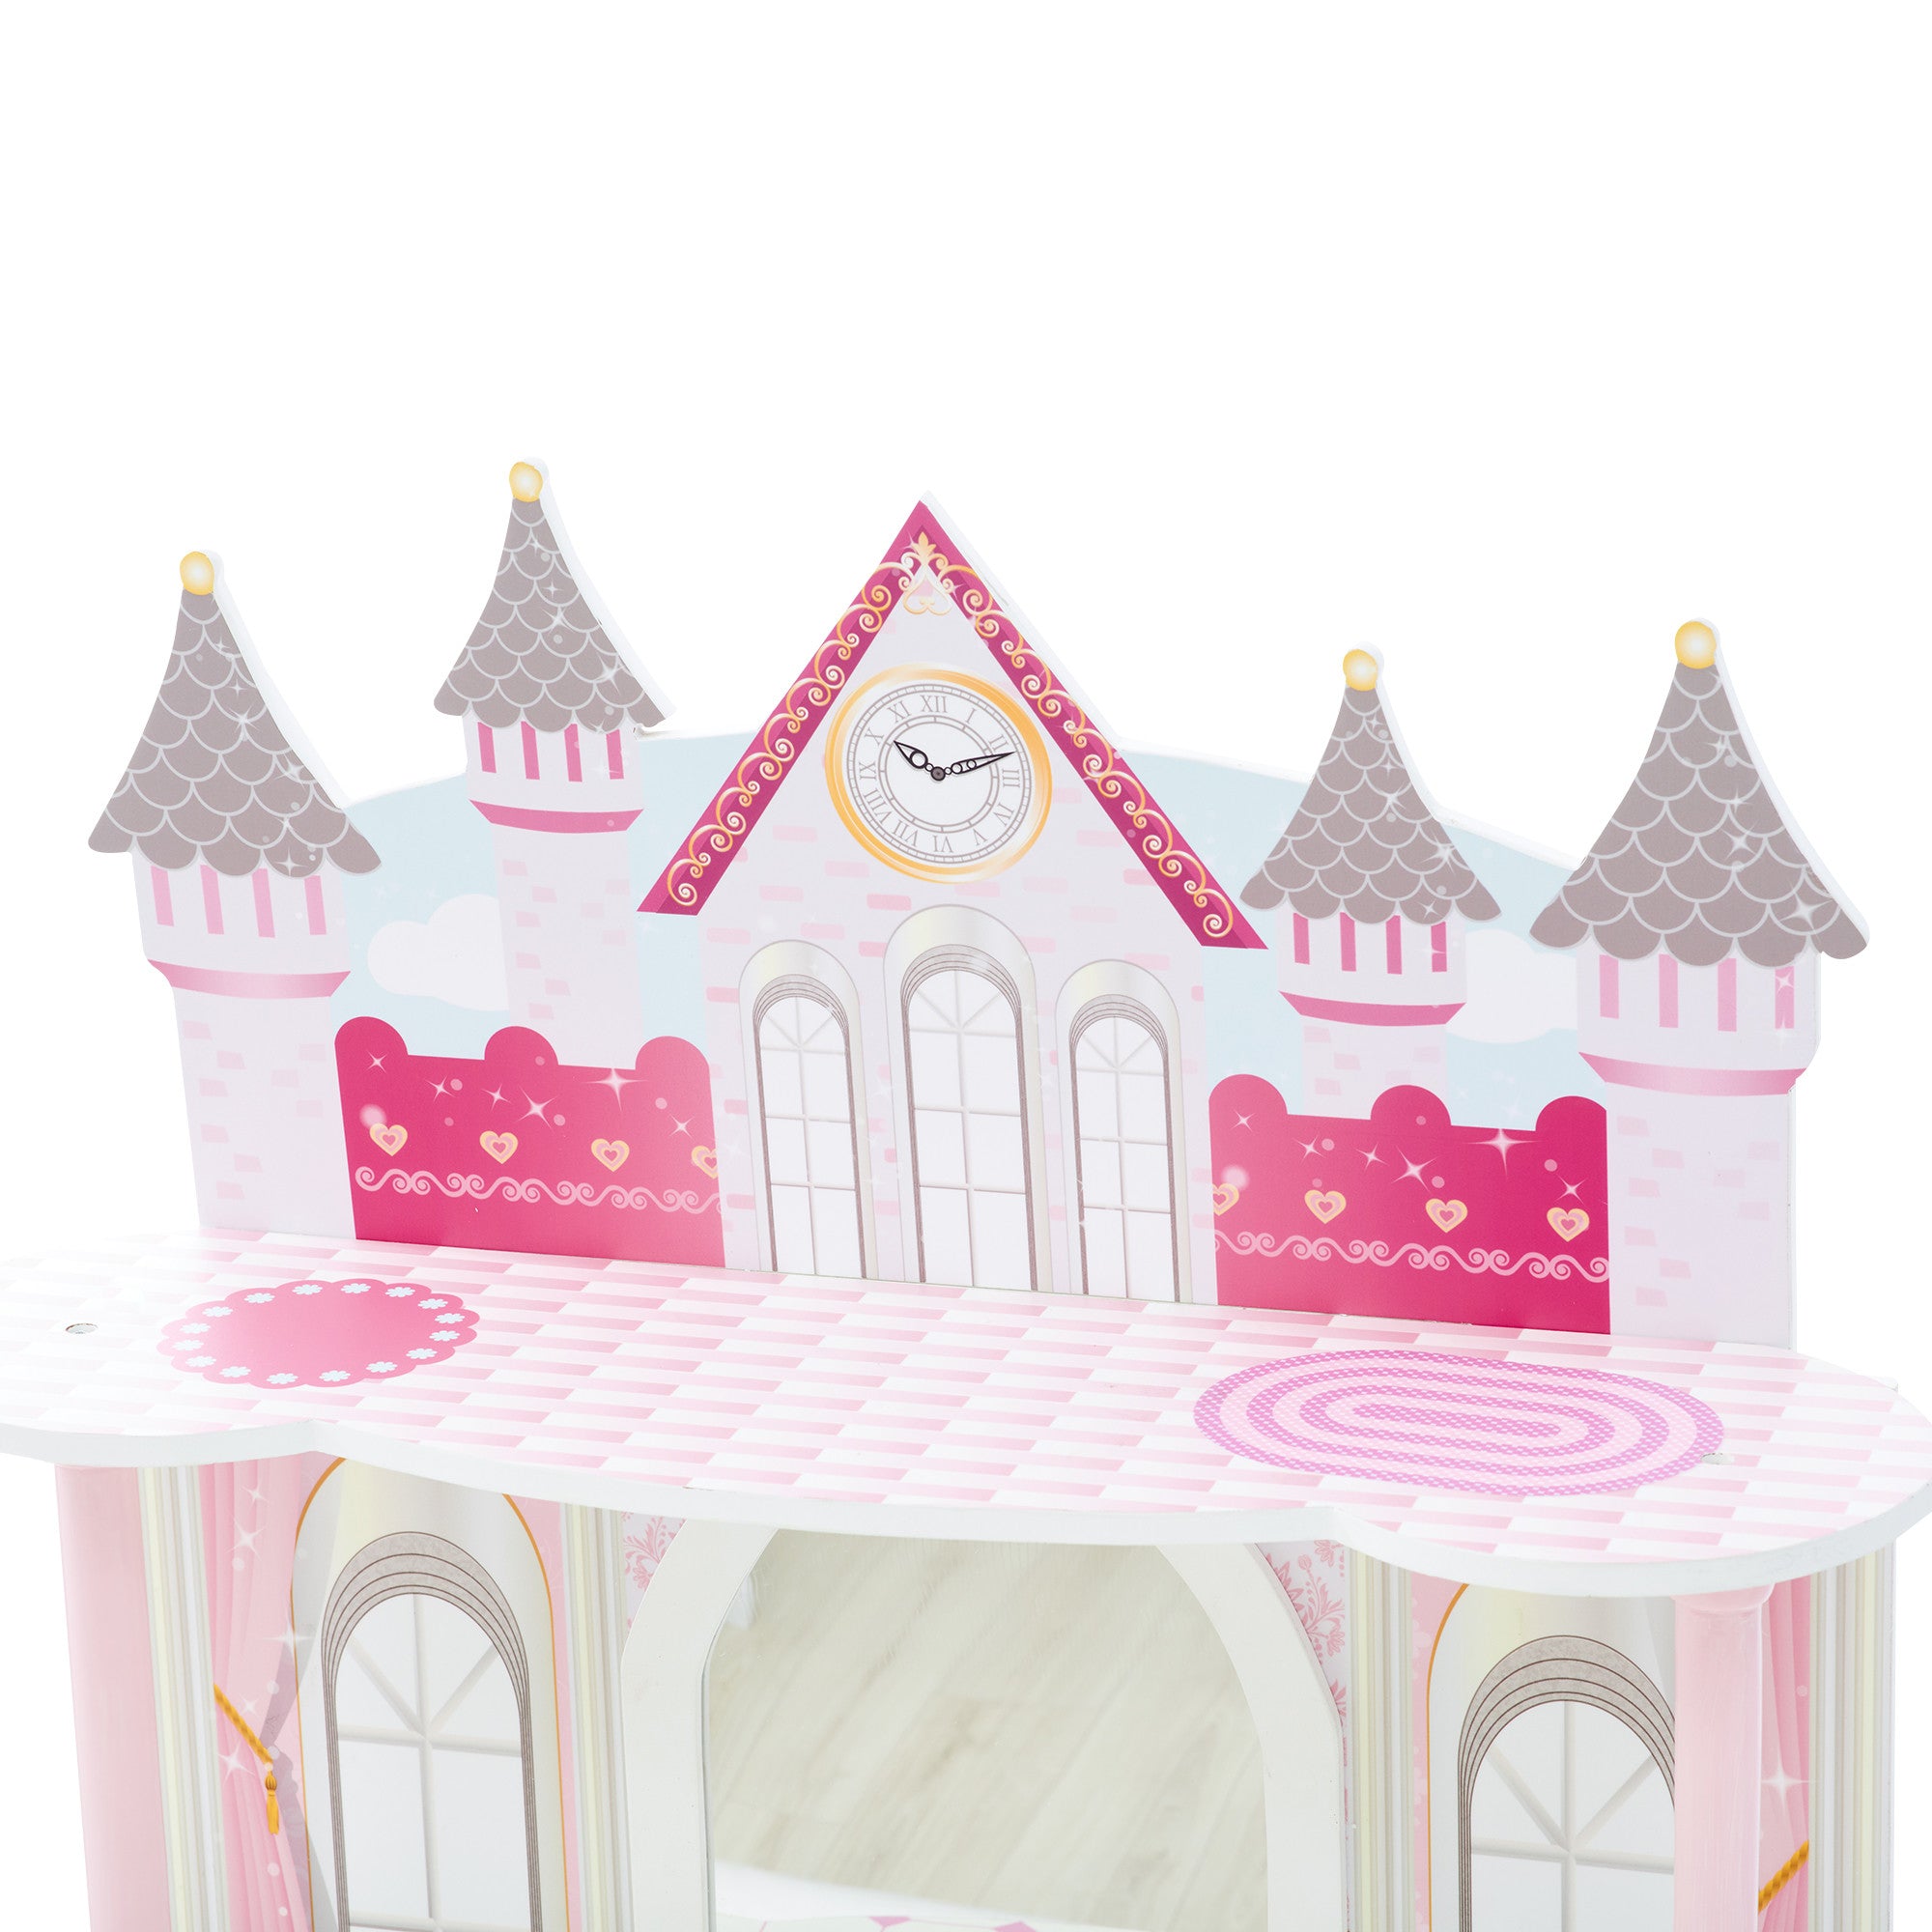 Fantasy Fields Kids Dreamland Castle Vanity Set with Chair and Accessories, White/Pink